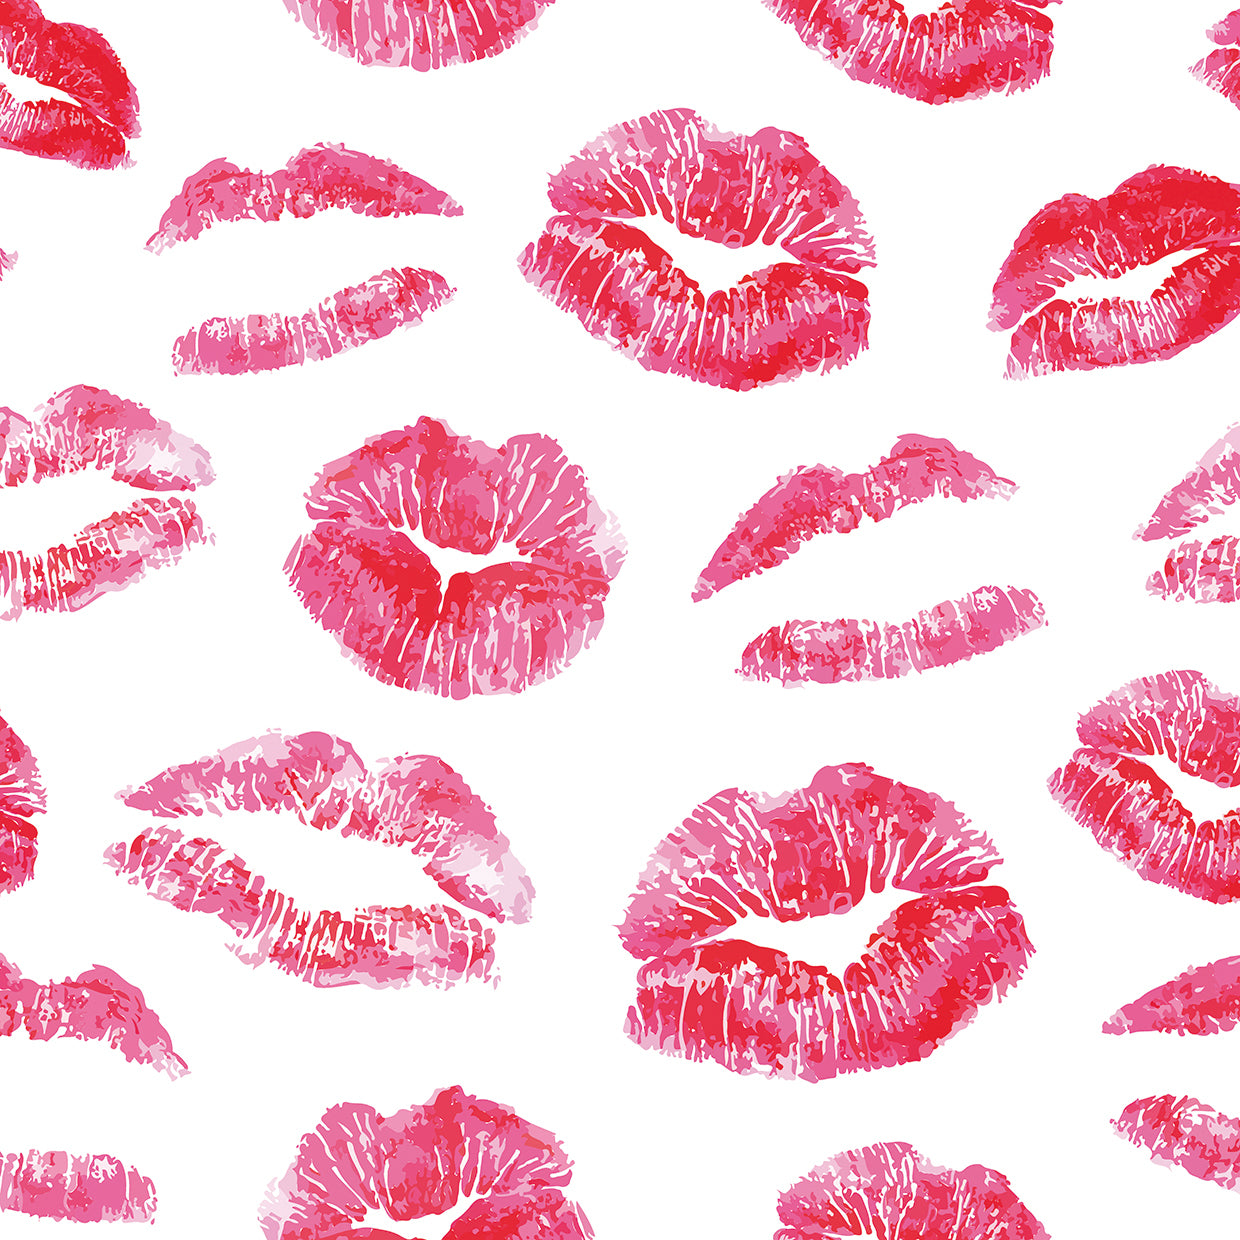 Classic Red Lipstick Kisses by DP Gallery | FineArtCanvas.com ...